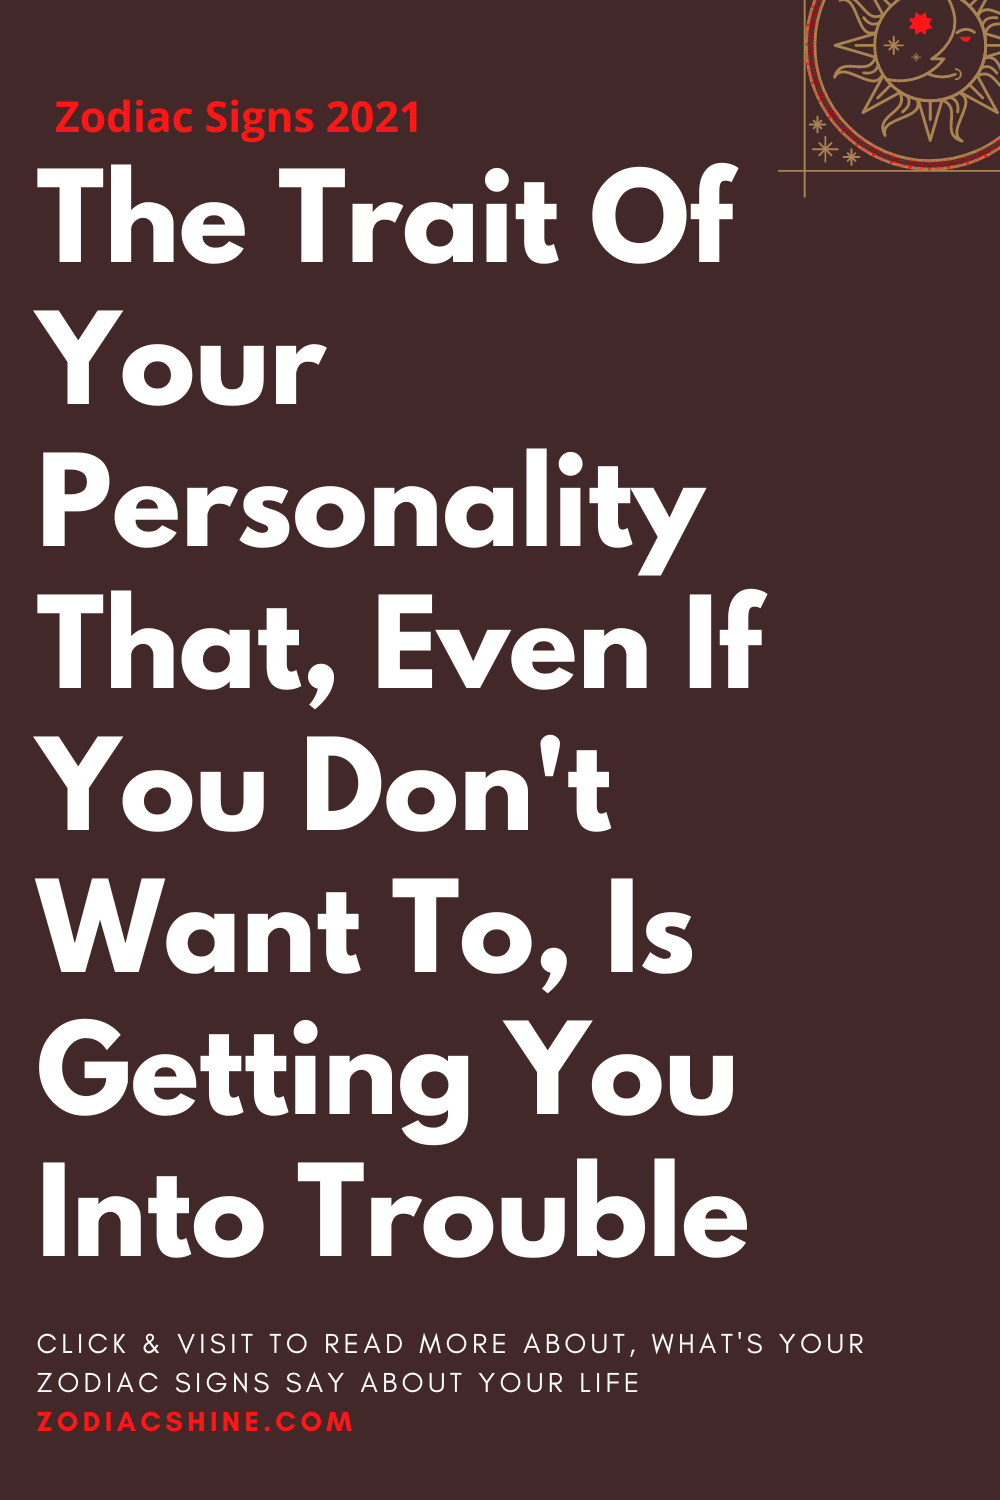 The Trait Of Your Personality That Even If You Don't Want To Is Getting You Into Trouble